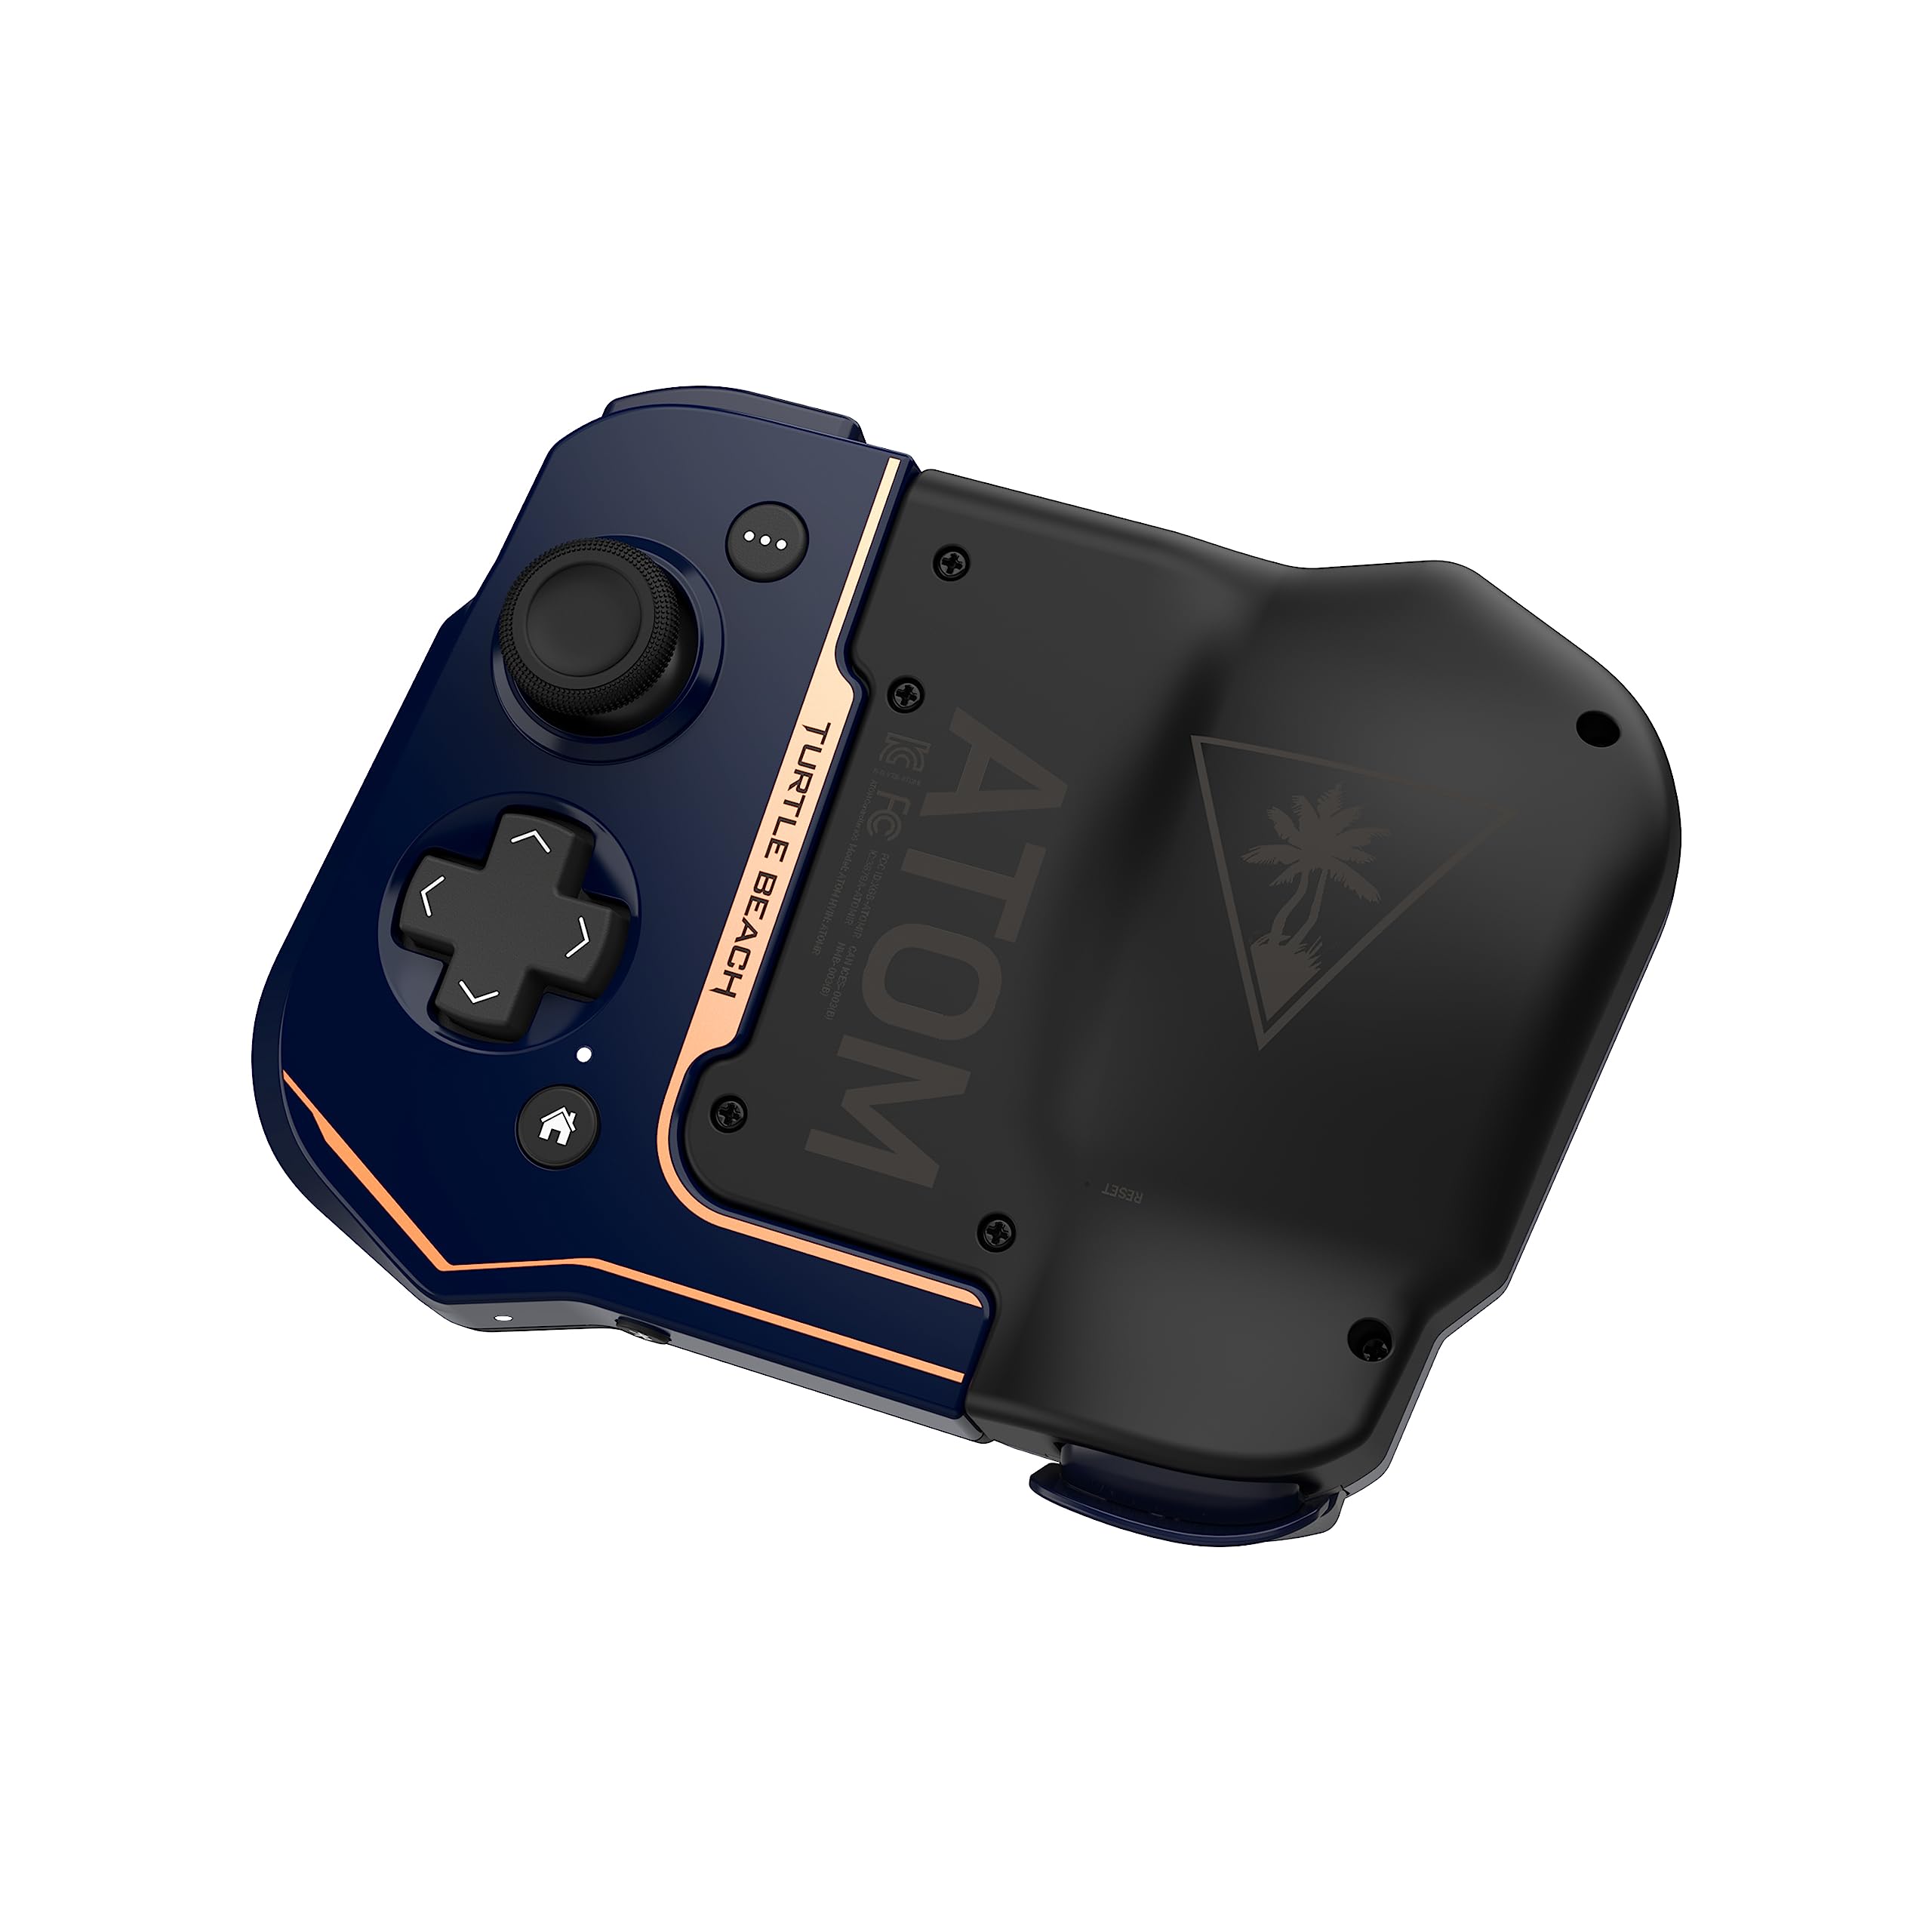 Turtle Beach Atom Mobile Game Controller with Bluetooth for Cloud Gaming on iPhone with Compact Shape, Console Style Controls & Low Latency Bluetooth – Cobalt Blue